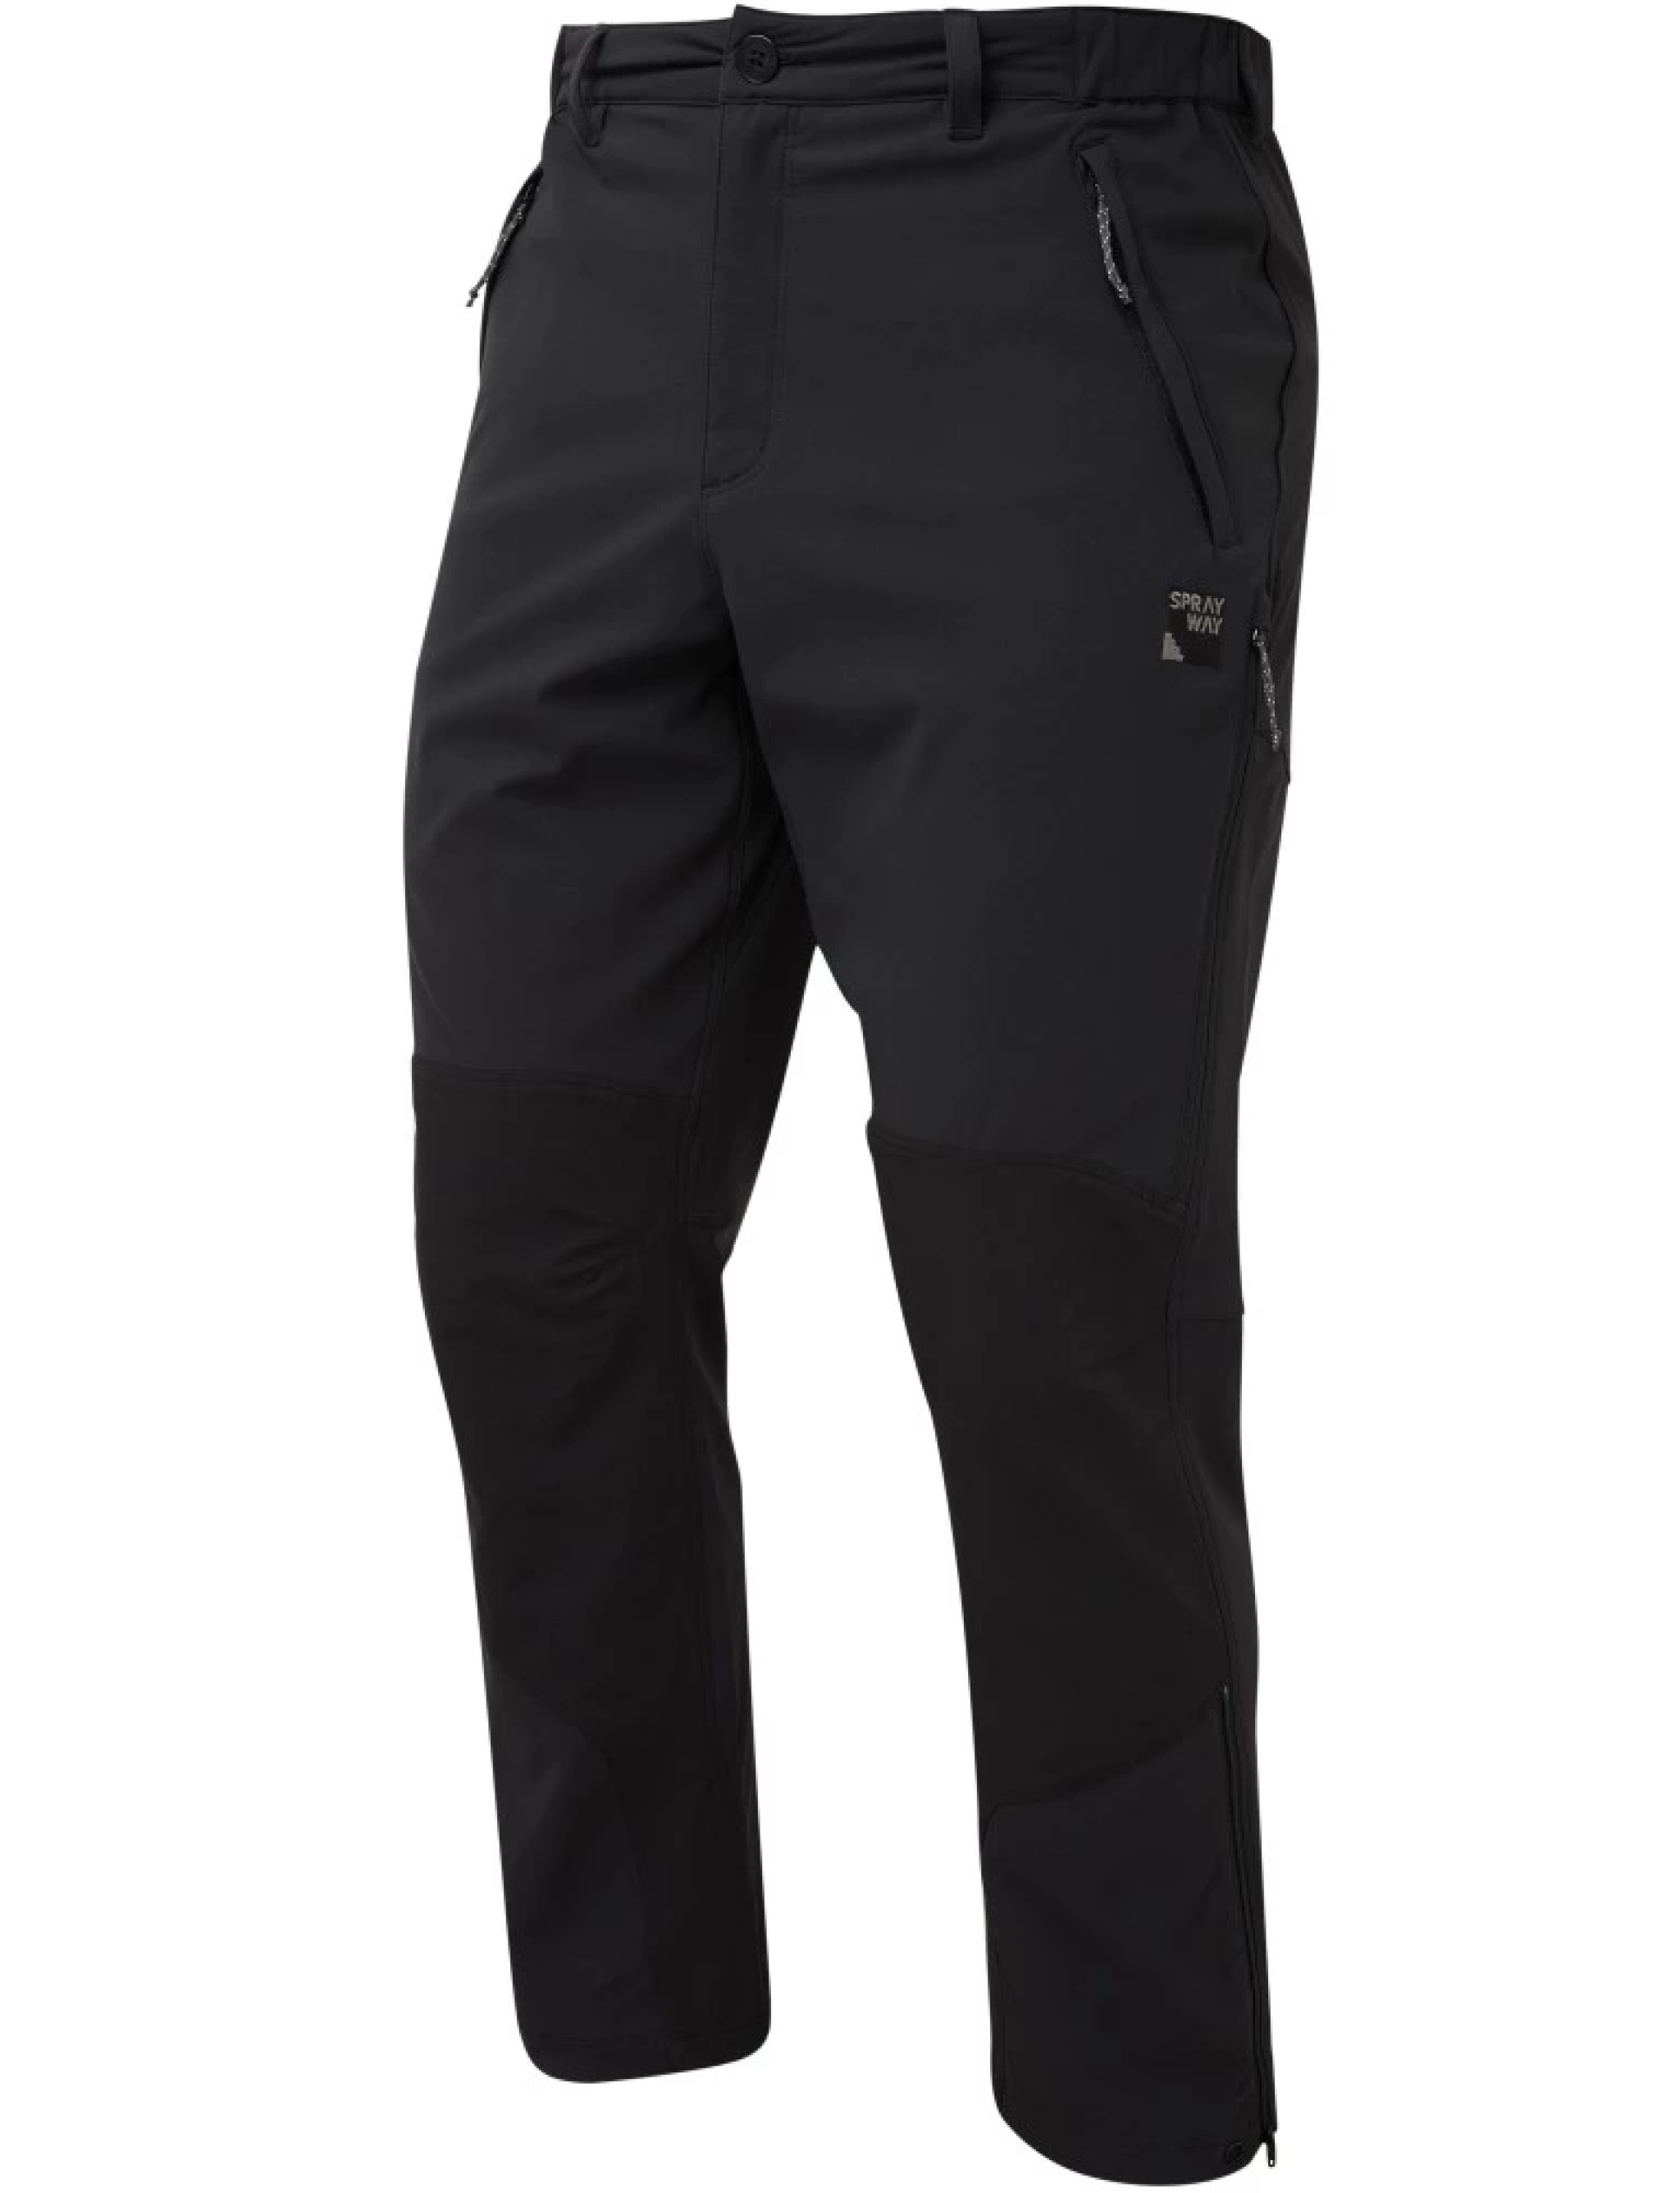 Sprayway Compass Pro Pant Mens Hiking Trousers | Agoora Outdoor